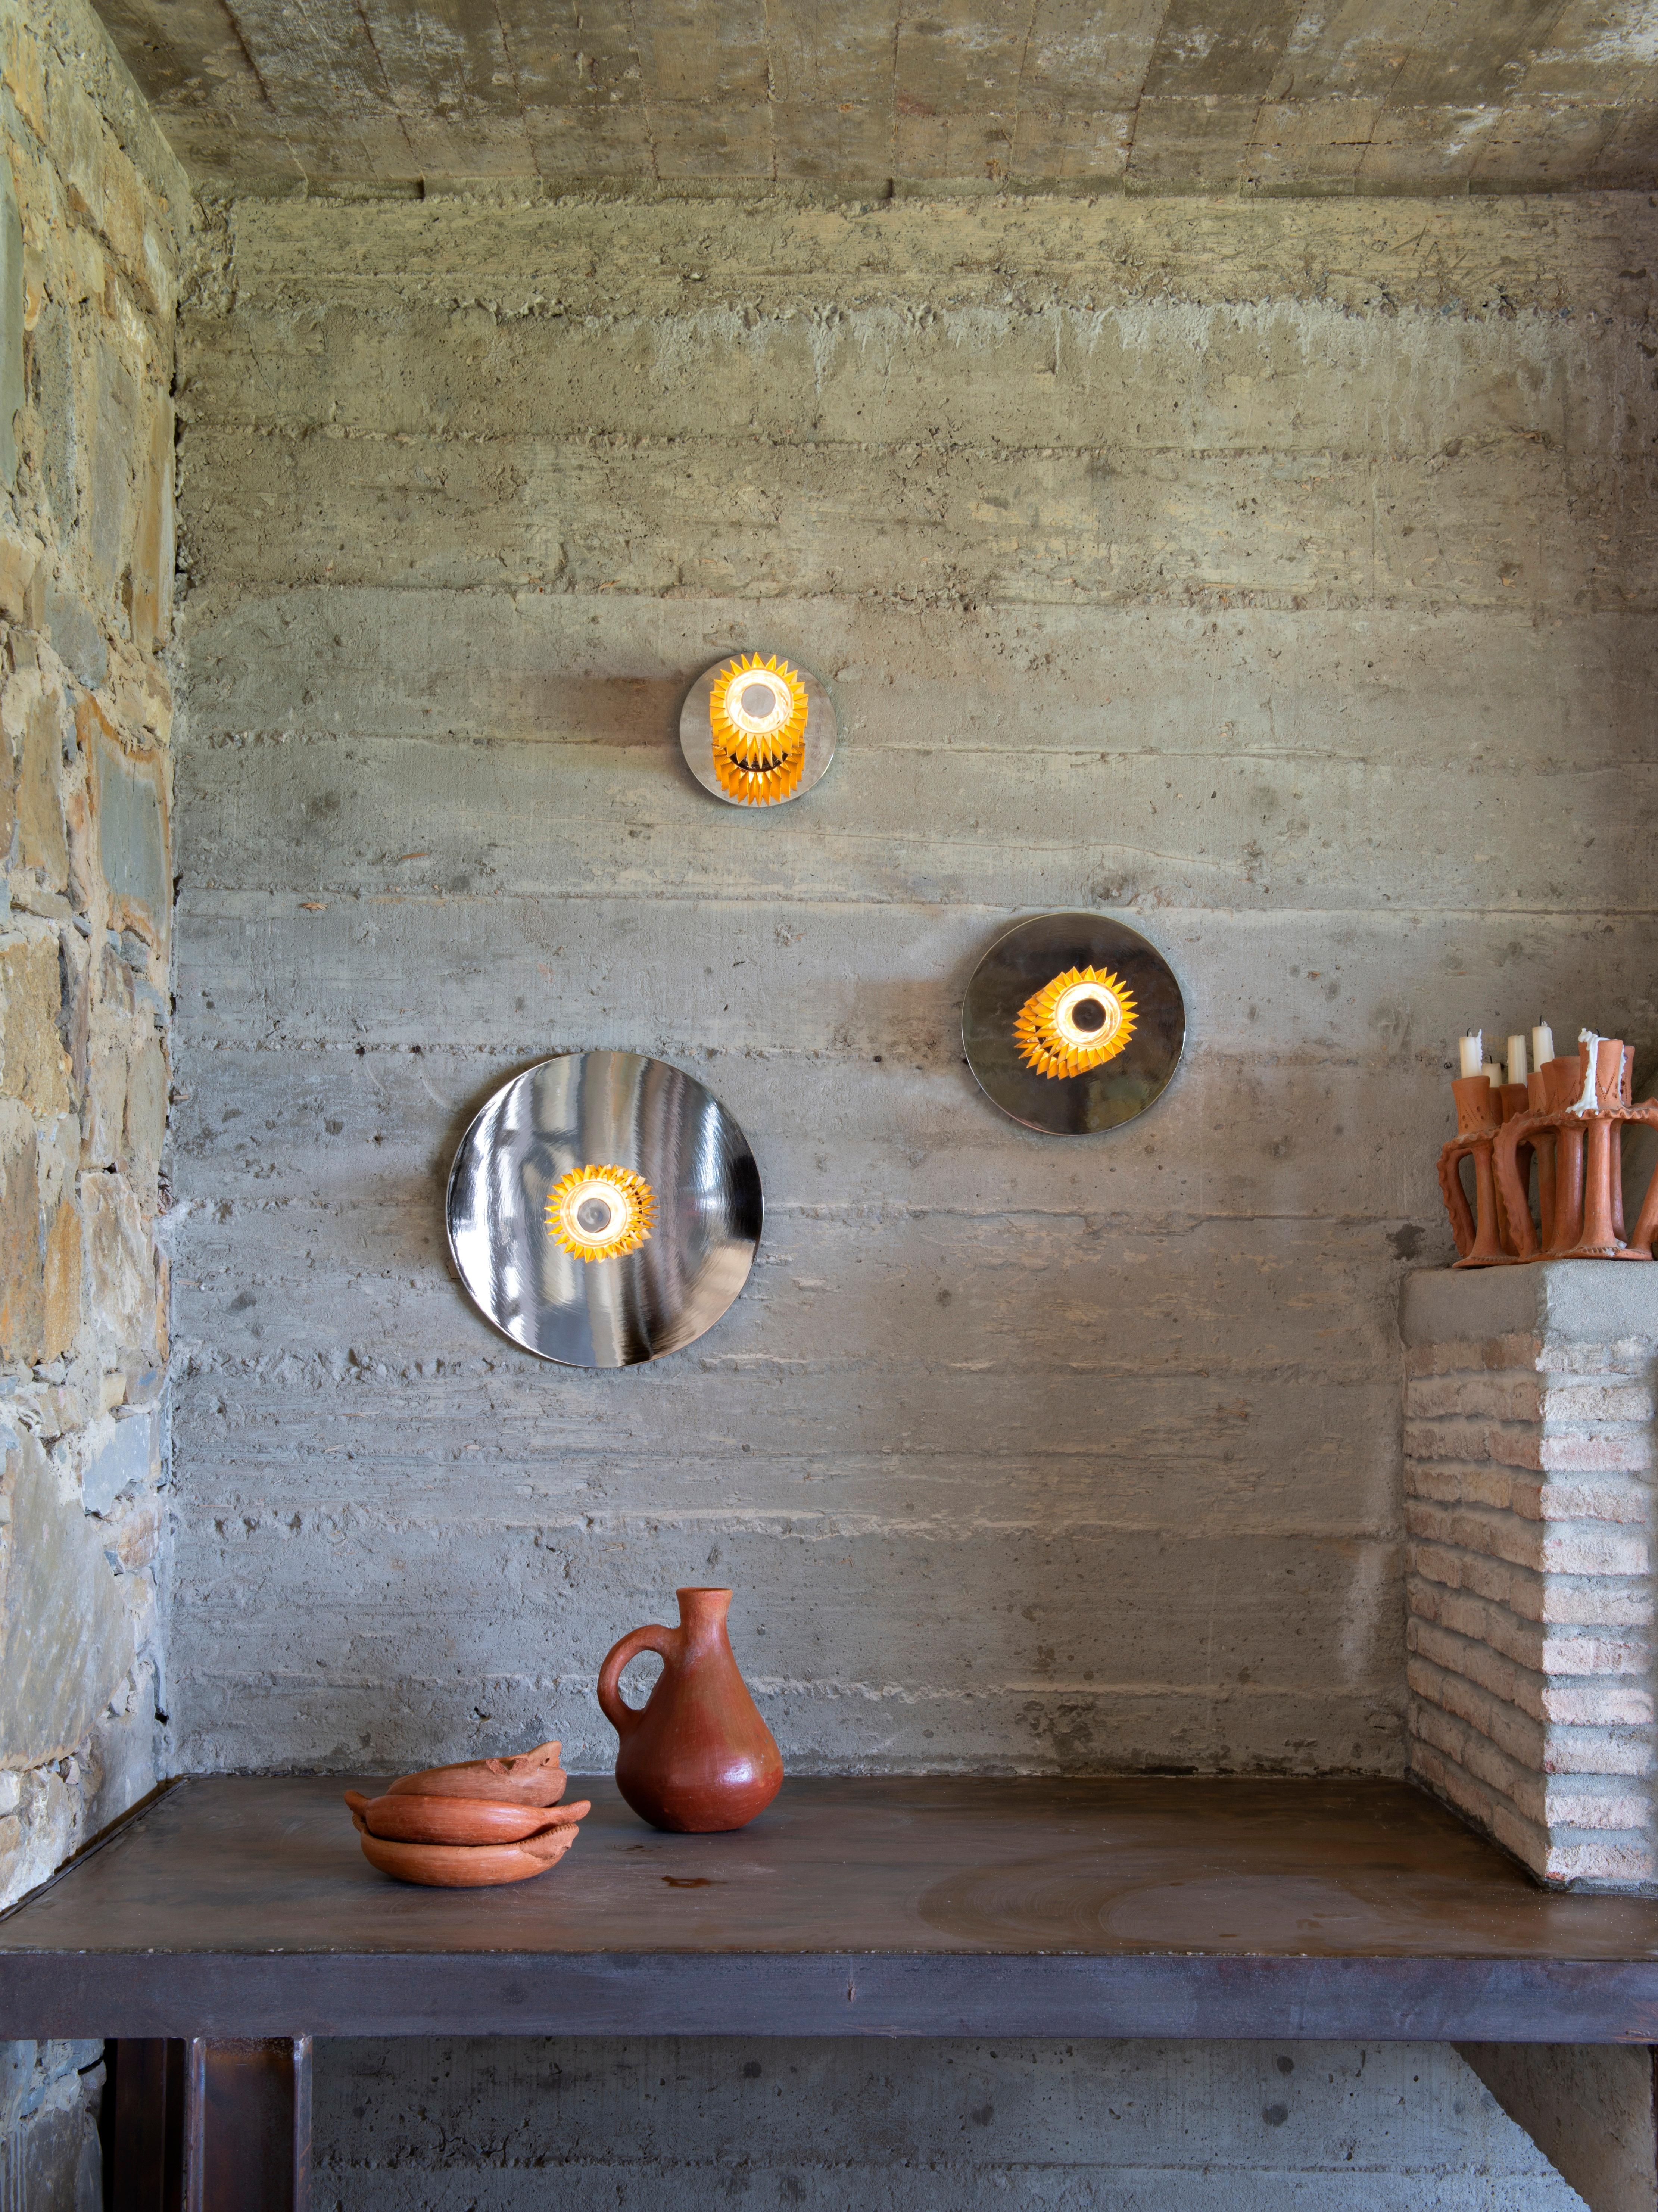 Medium in the Sun Wall Lamp by Dominique Perrault & Gaëlle Lauriot-prévost For Sale 3